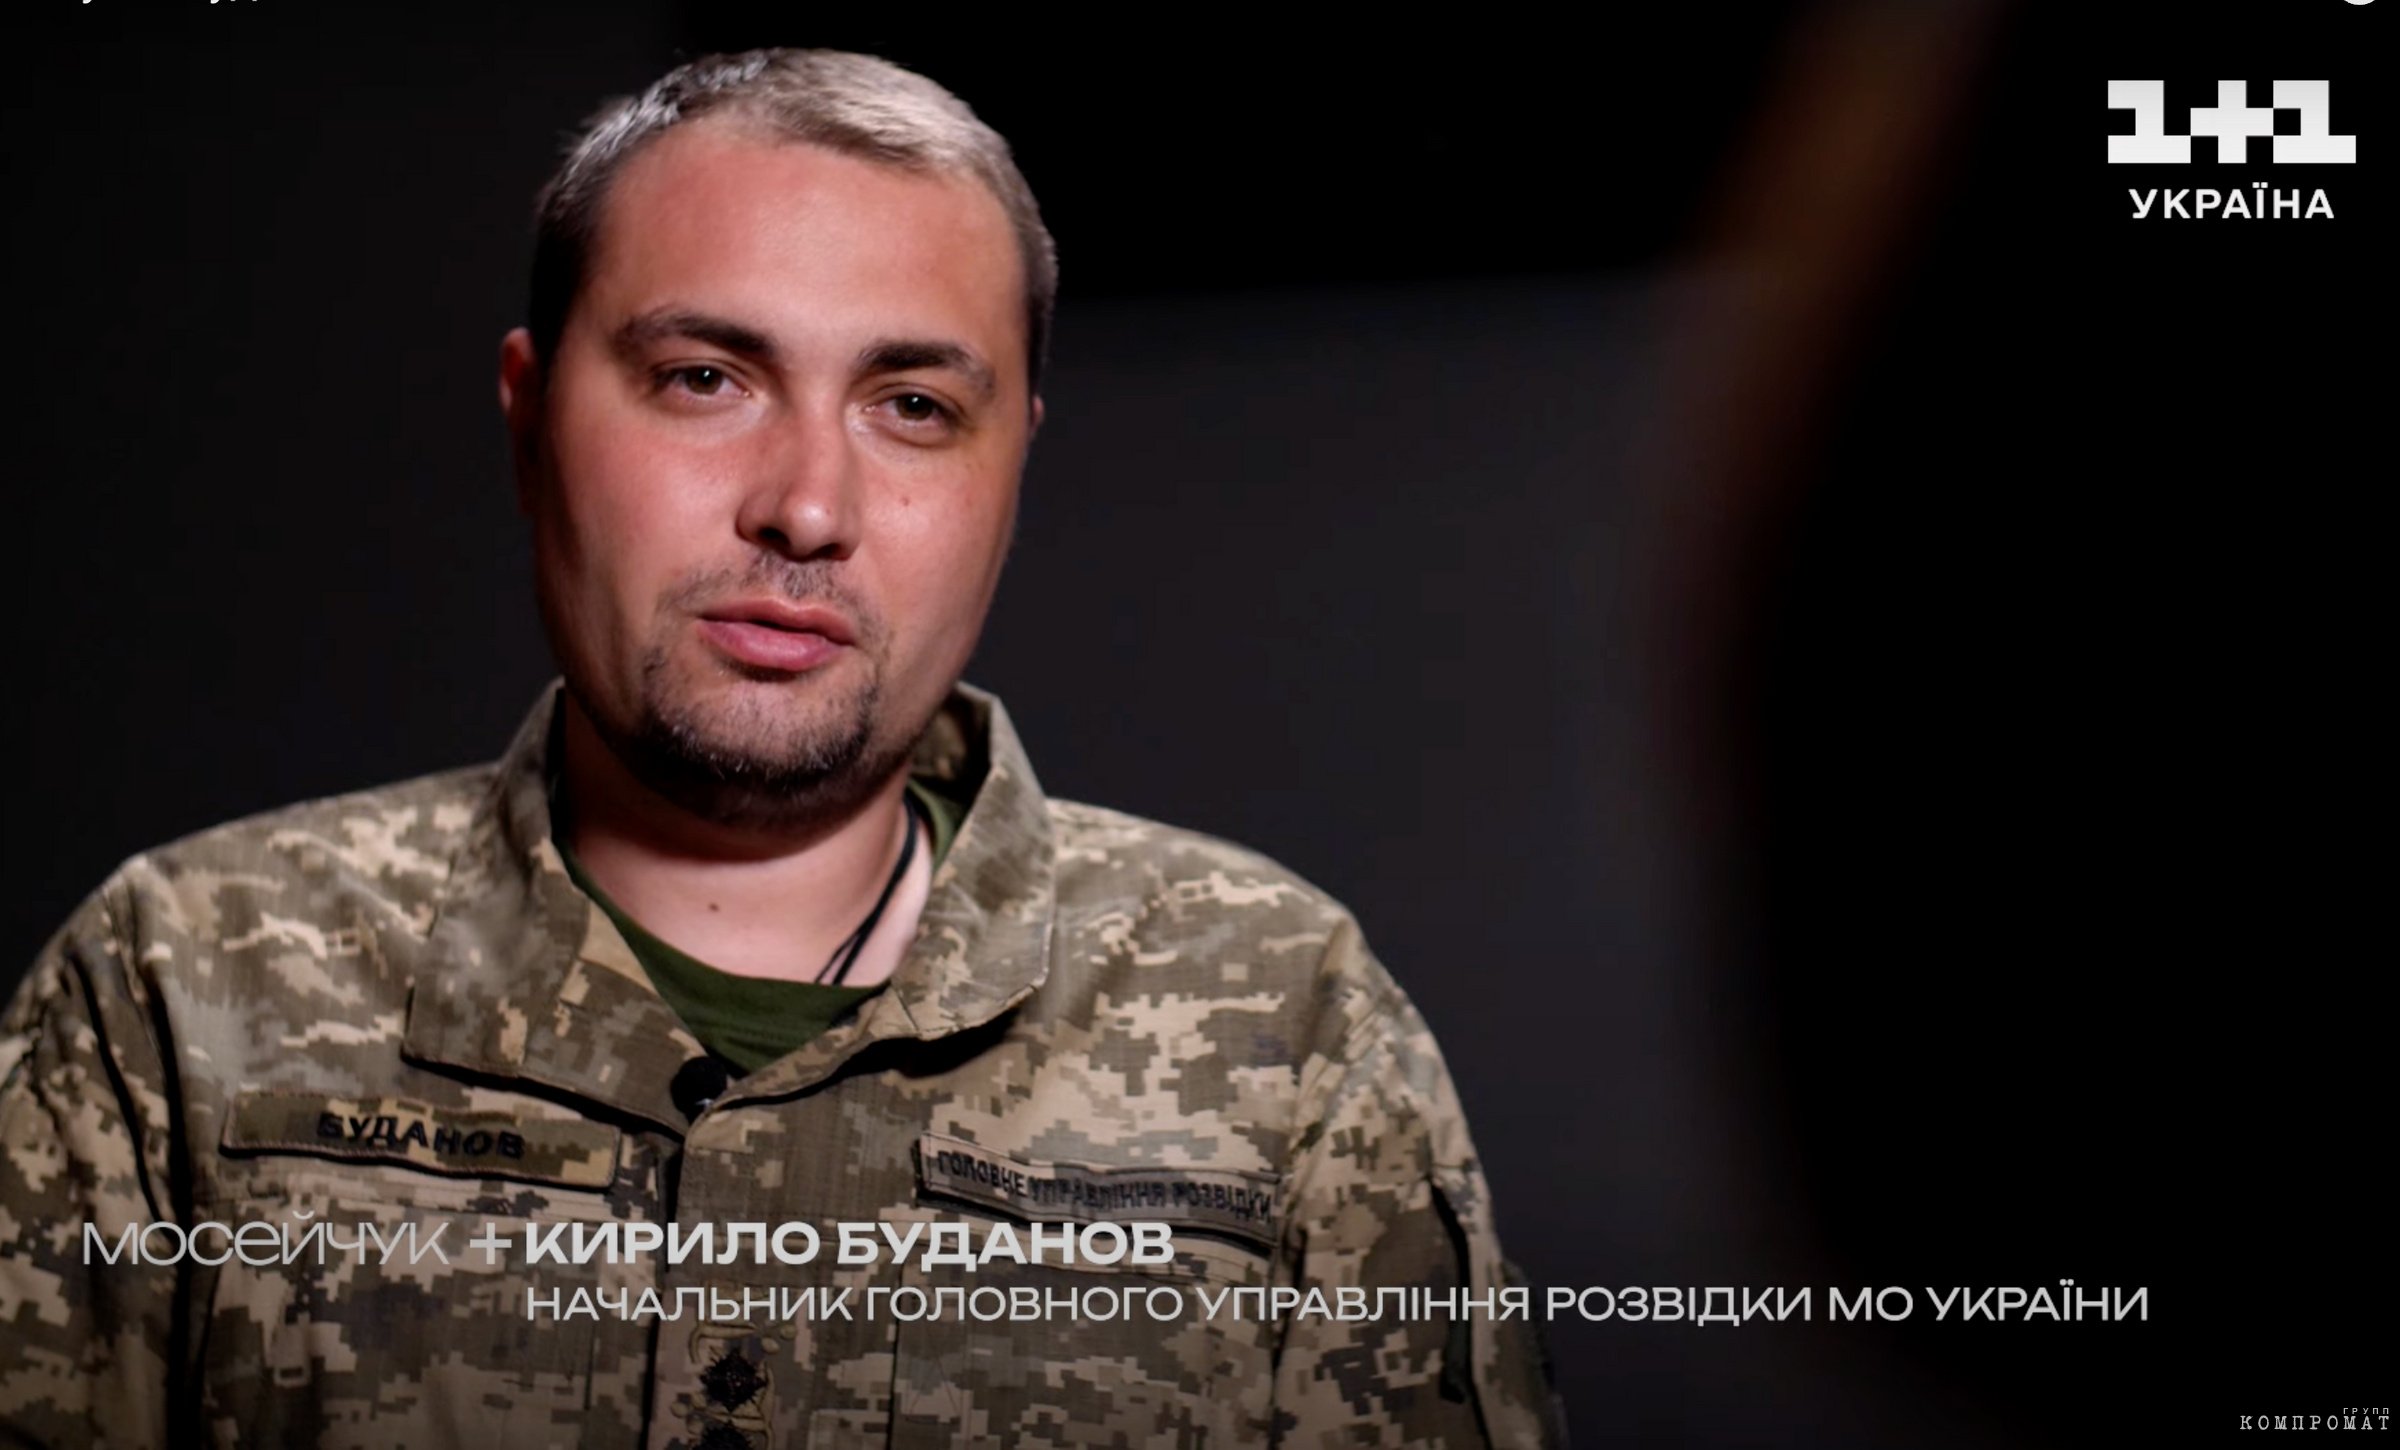 In recent days, Budanov has not skimped on interviews for central Ukrainian TV channels.